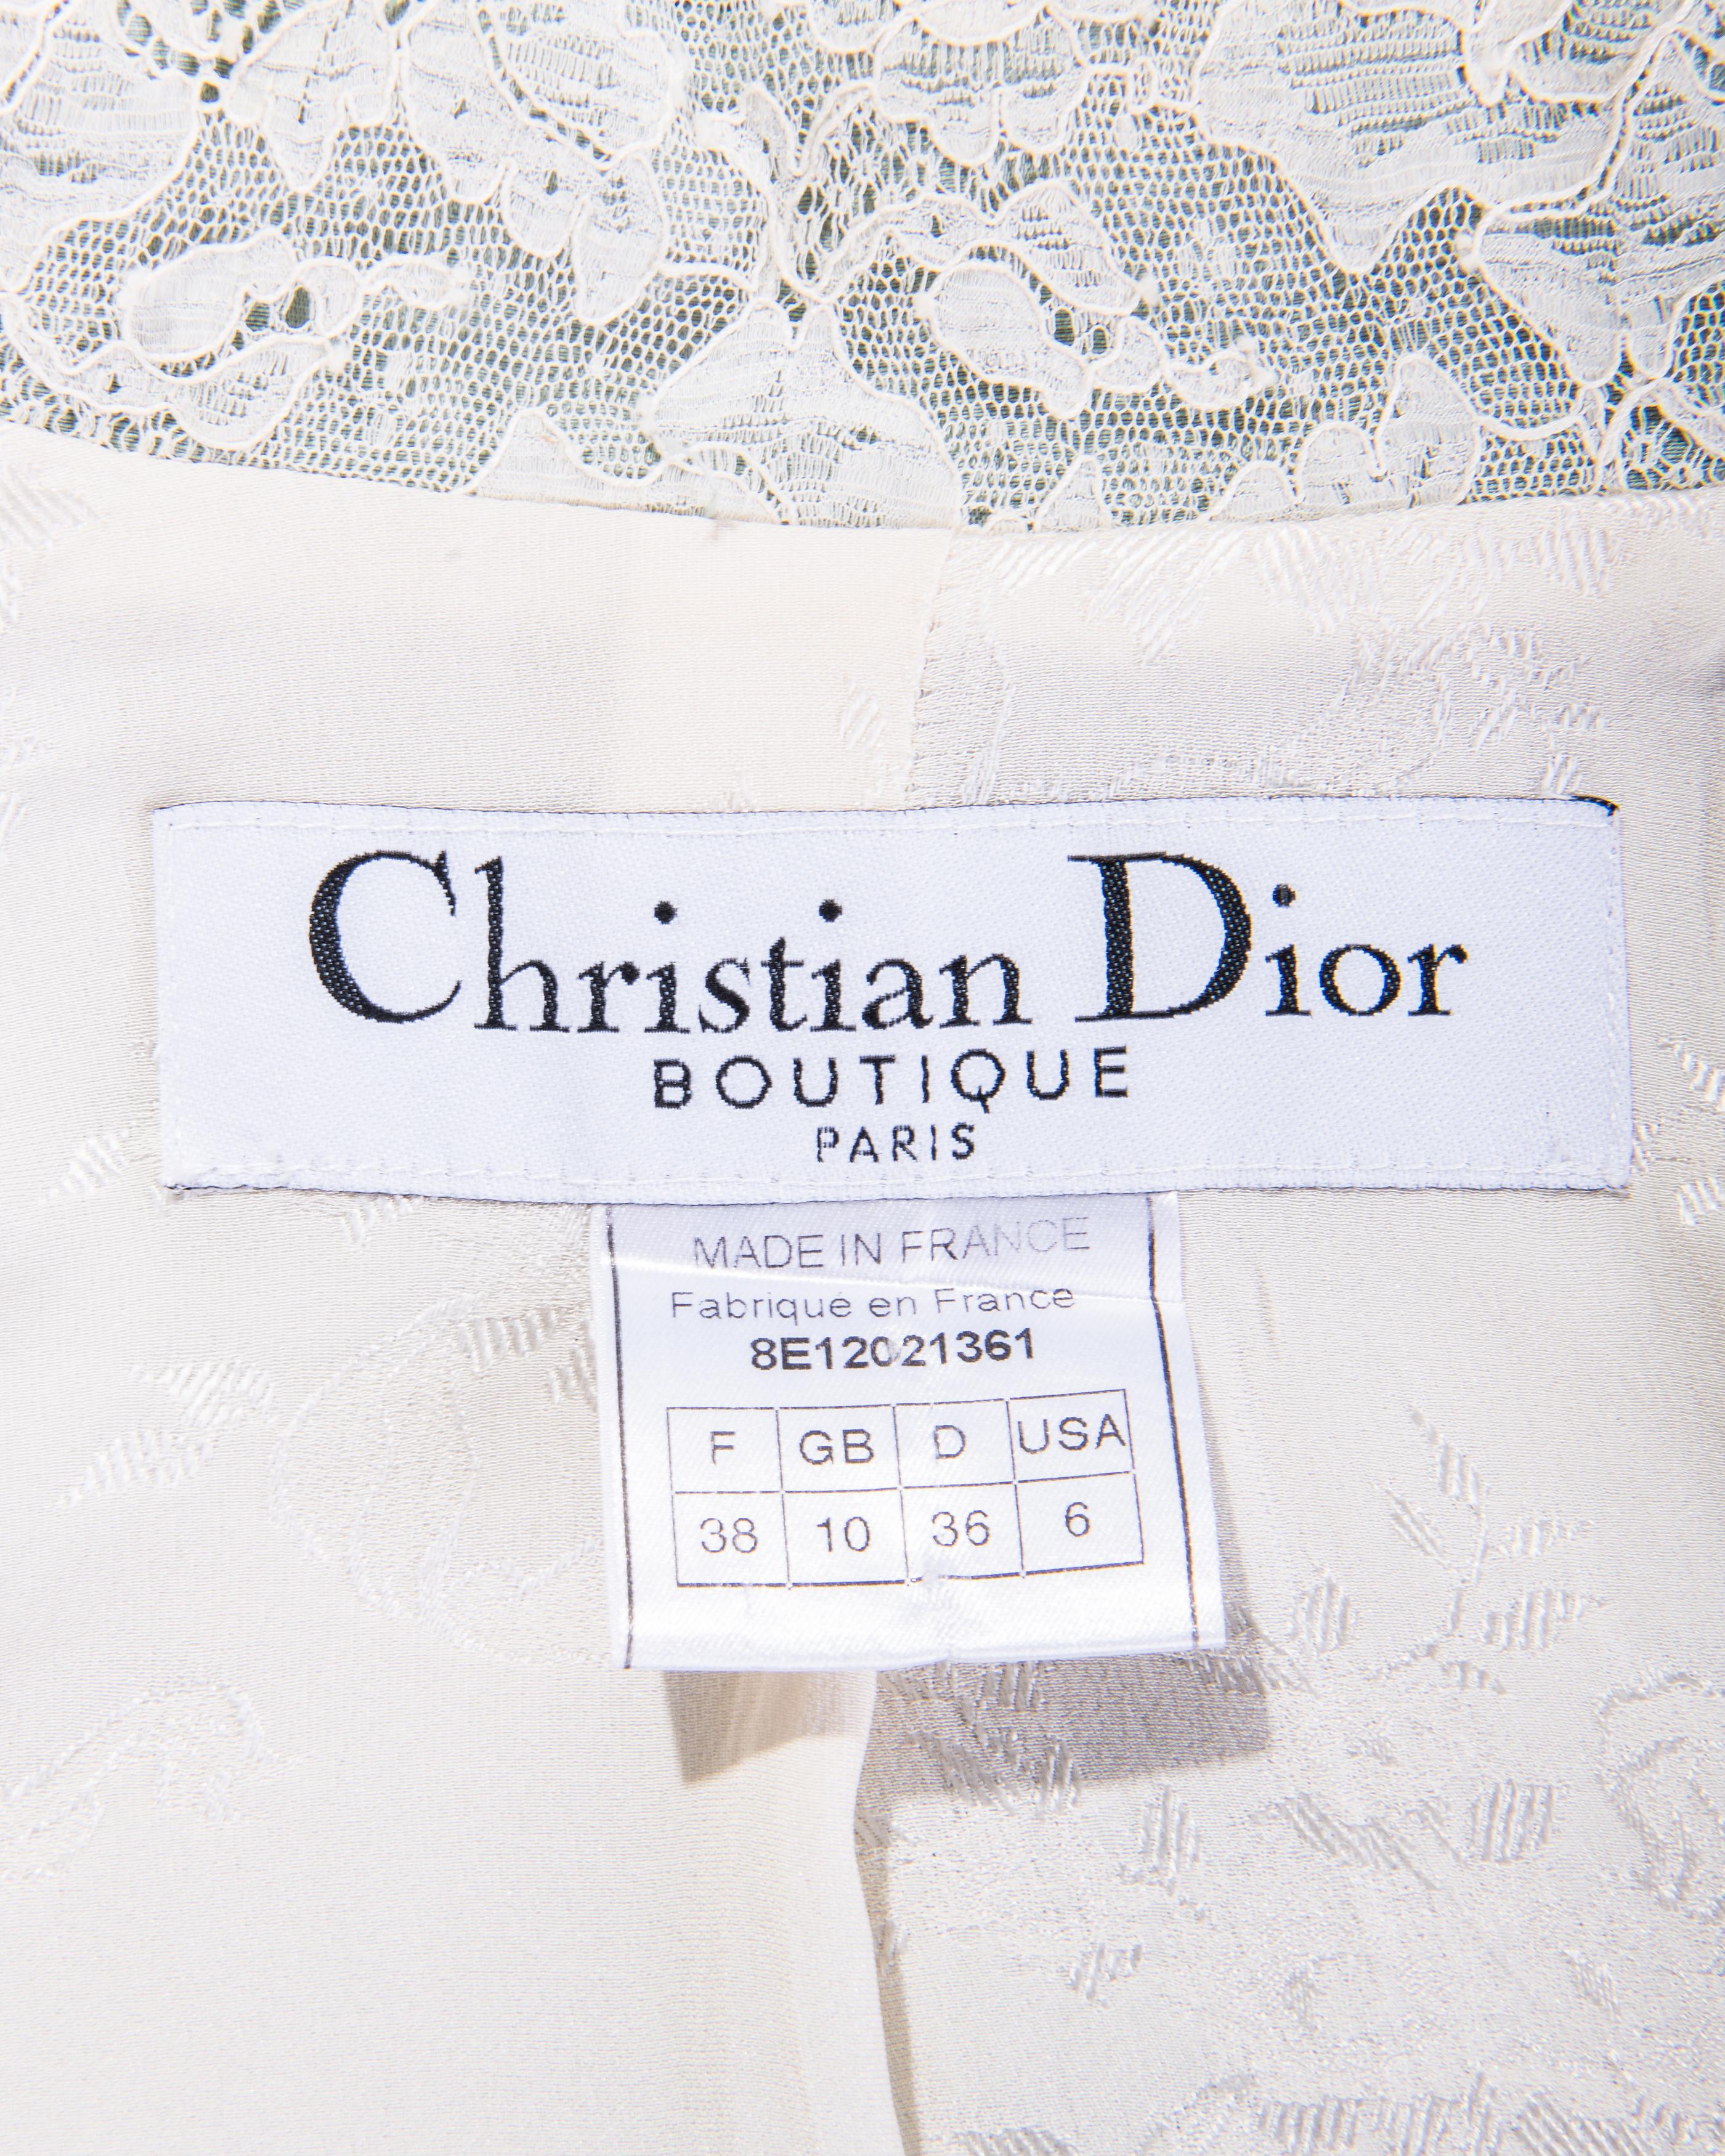 S/S 1998 Christian Dior by John Galliano Green Floral Pattern Jacket 4